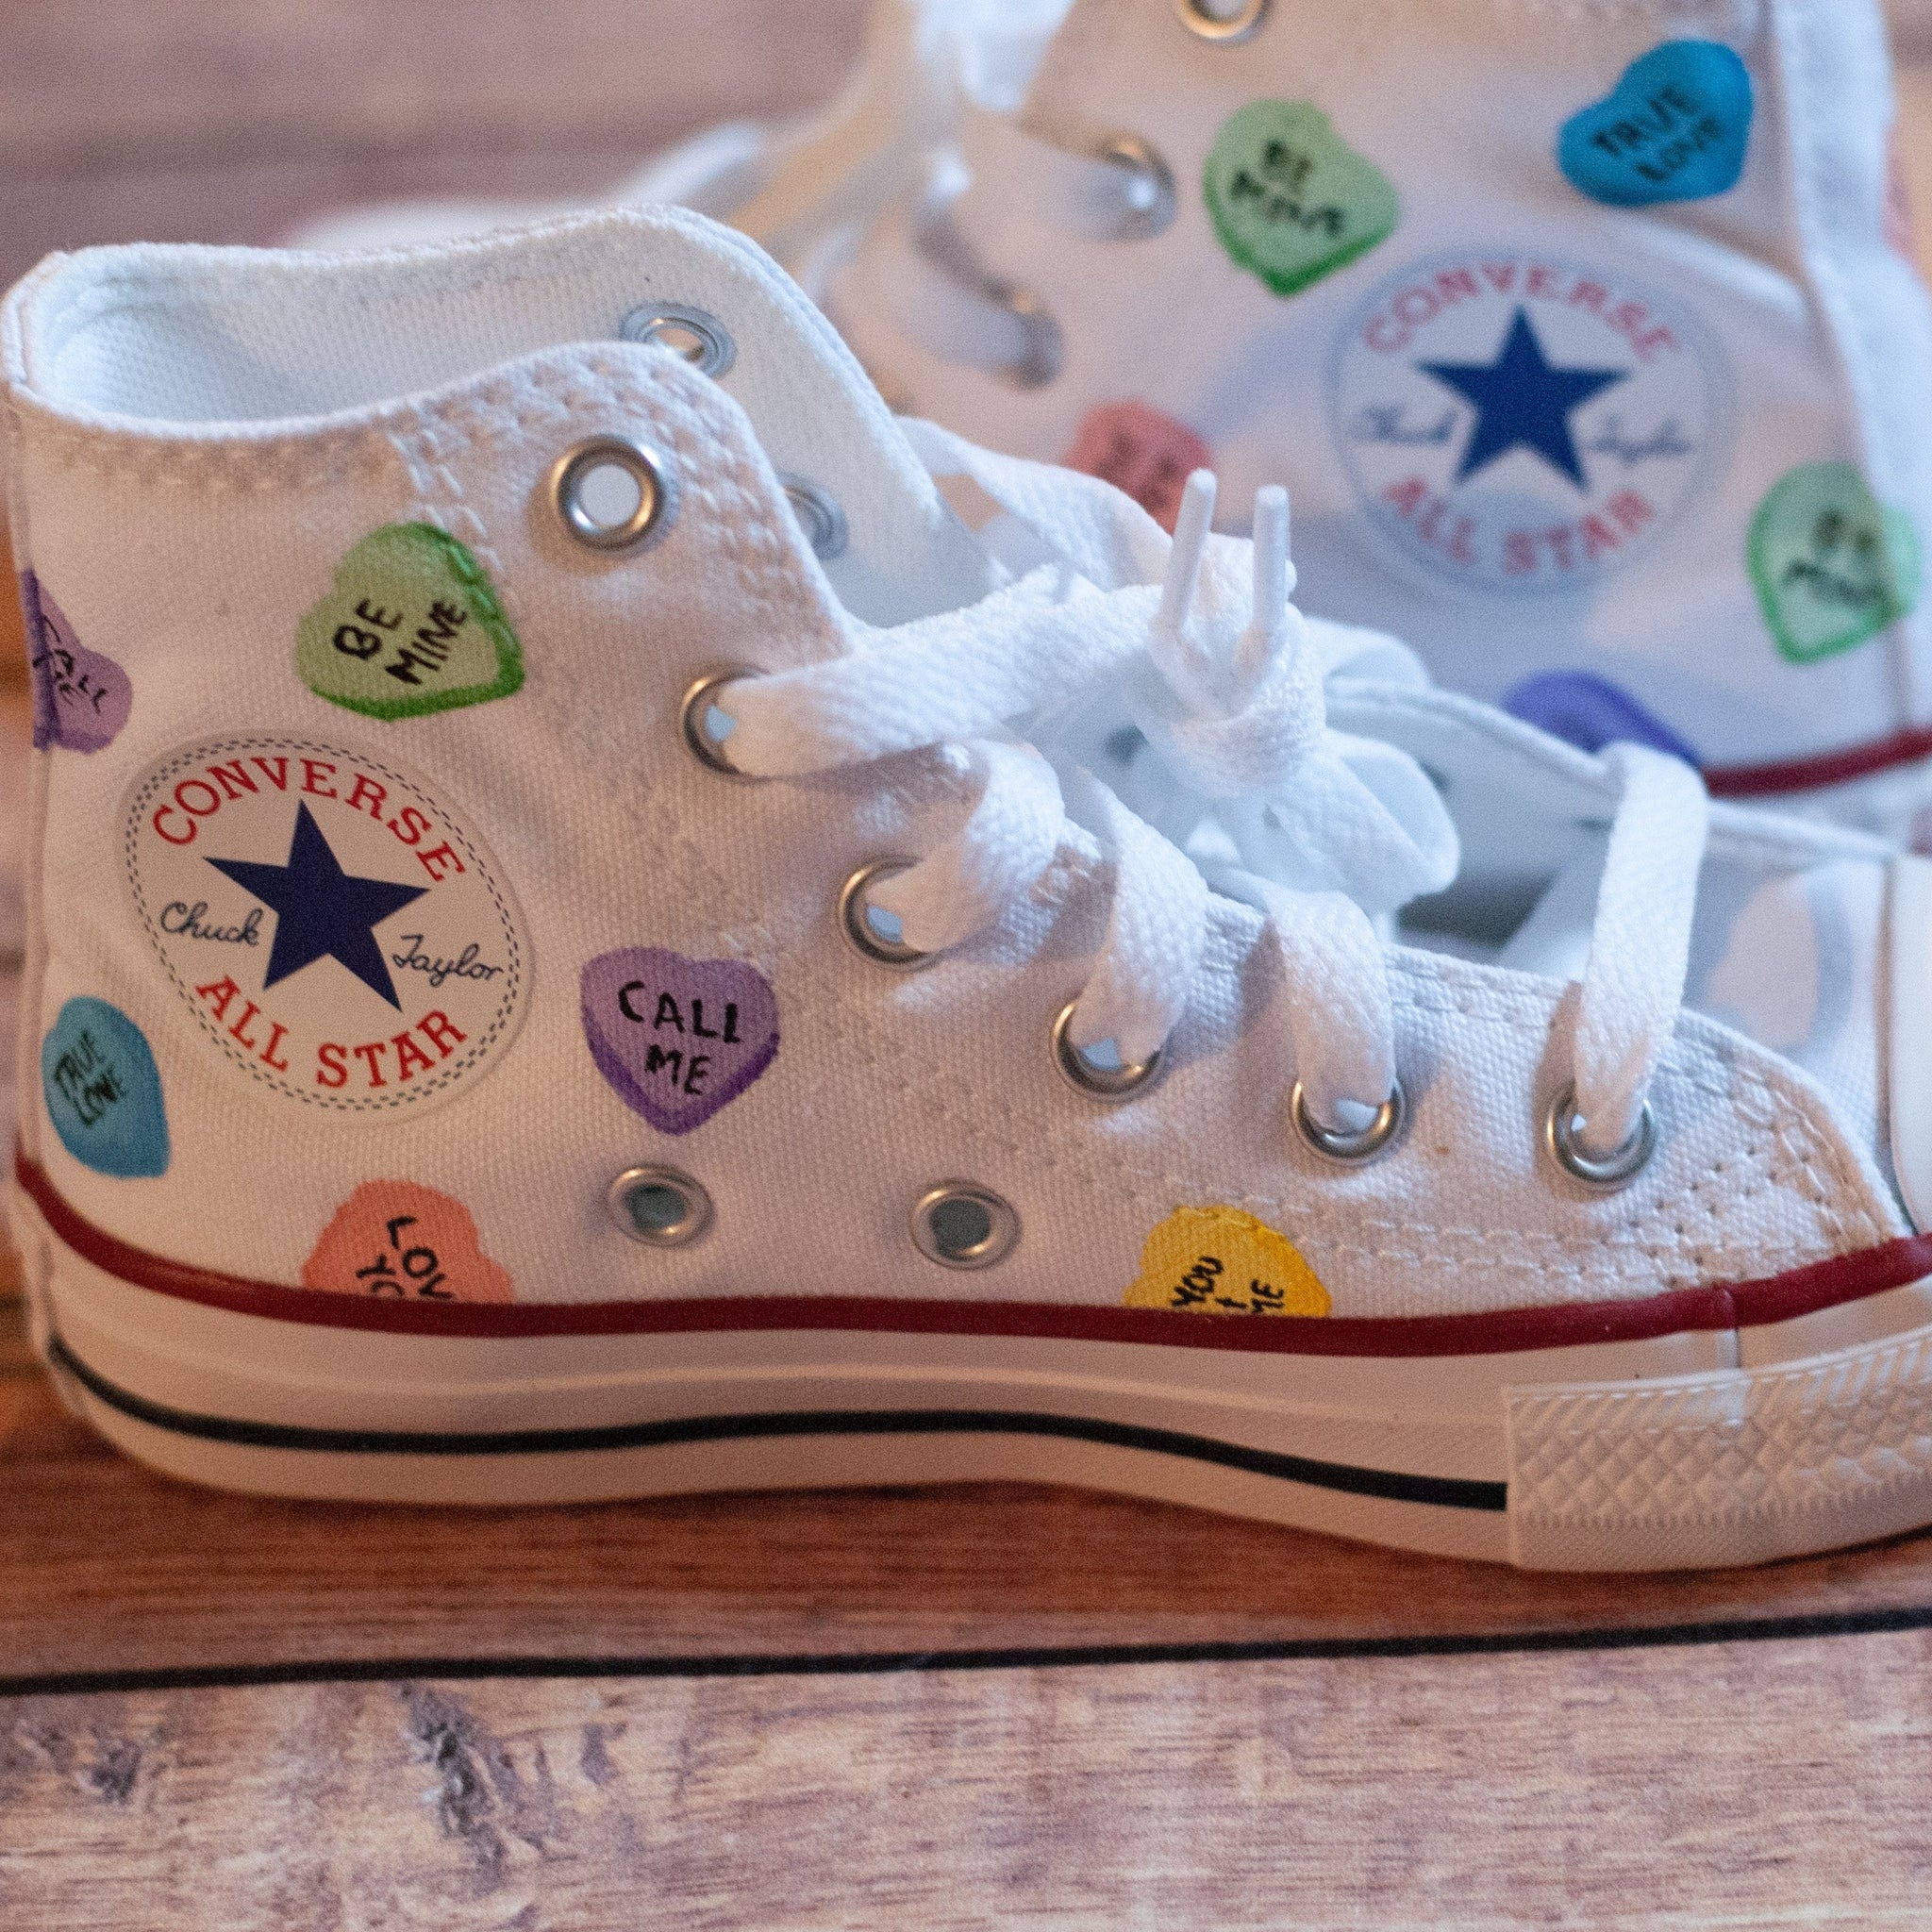 afsked Kompatibel med høg Candy Heart Converse | Hand Painted Valentine's Day Converse – With love,  Paint